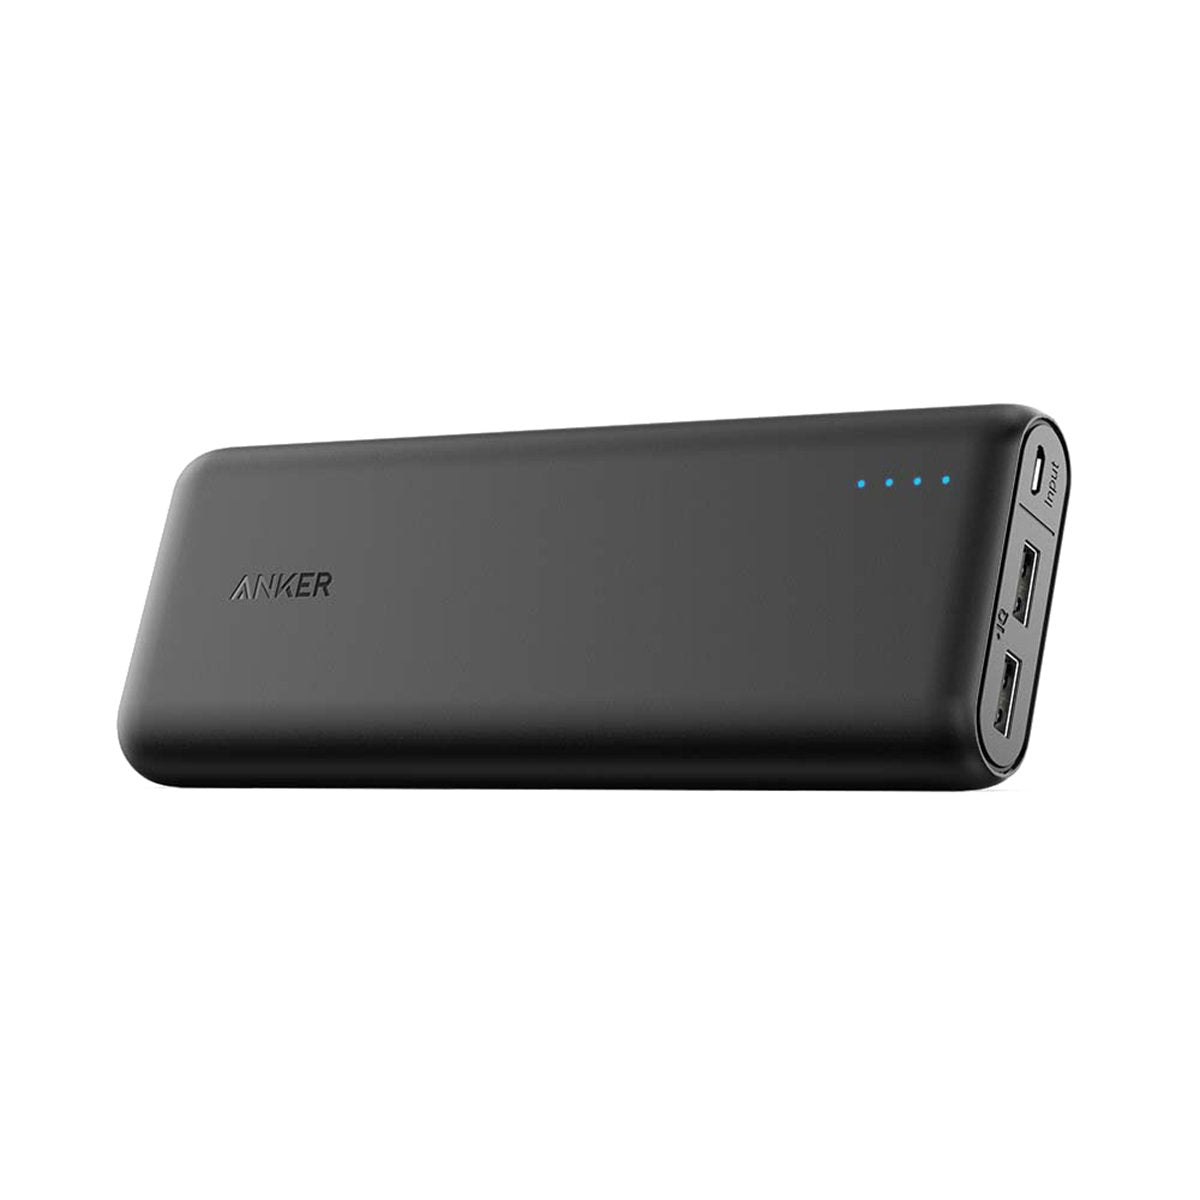 Anker 20100 mAh Fast Charging with PowerIQ Technology Lithium Polymer Power  Bank PowerCore 20100, A1271-Black